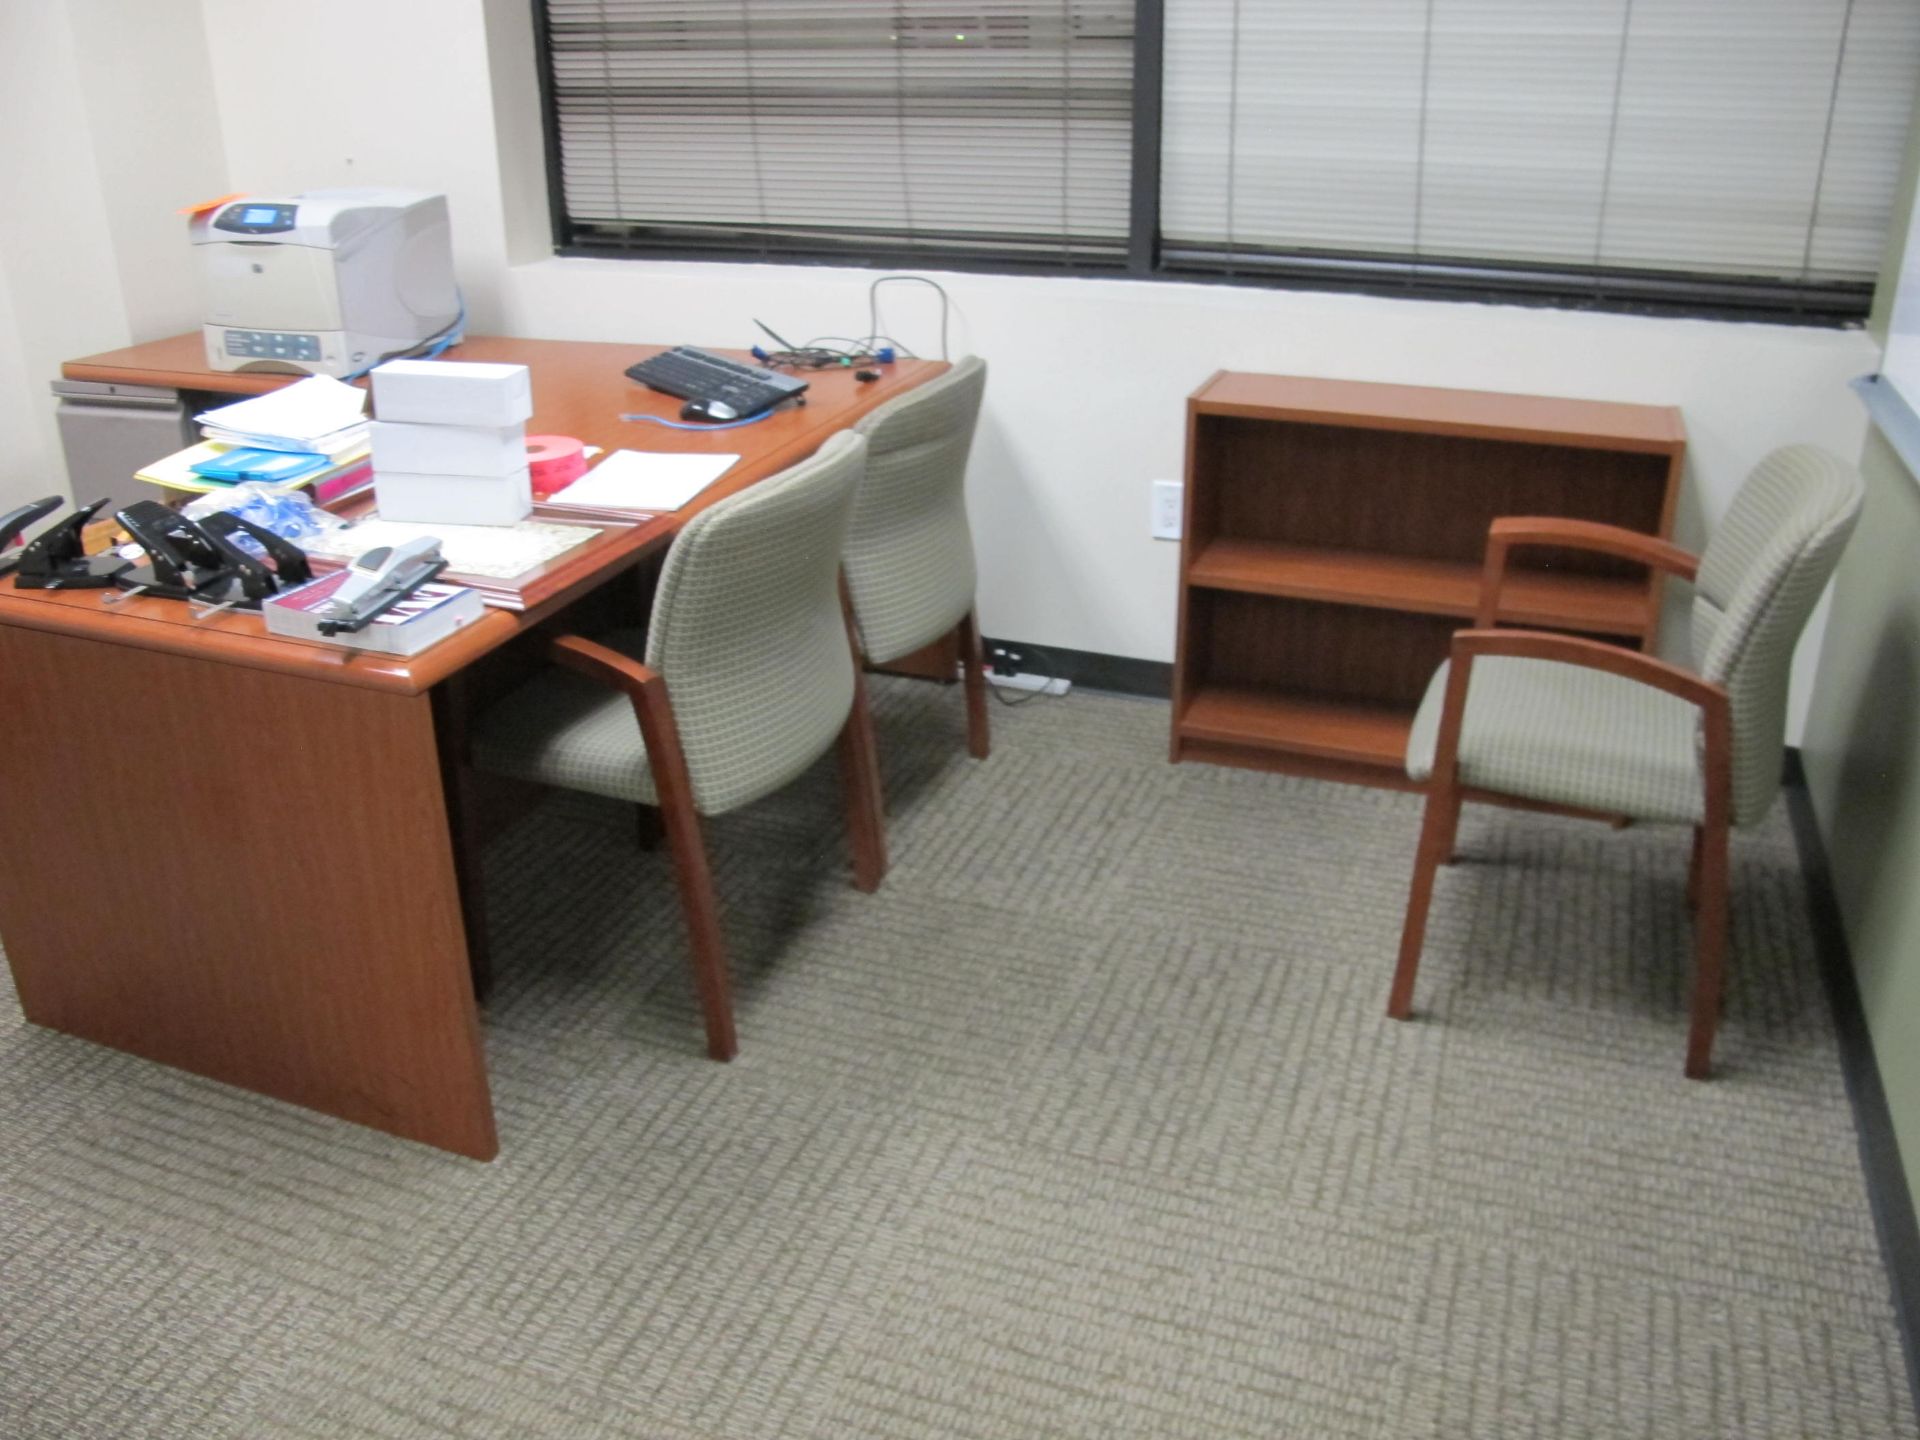 Contents of Office including L-Shaped Desk, 3 Side Chairs, 2-Shelf Bookcase, 2-Drawer Lateral File